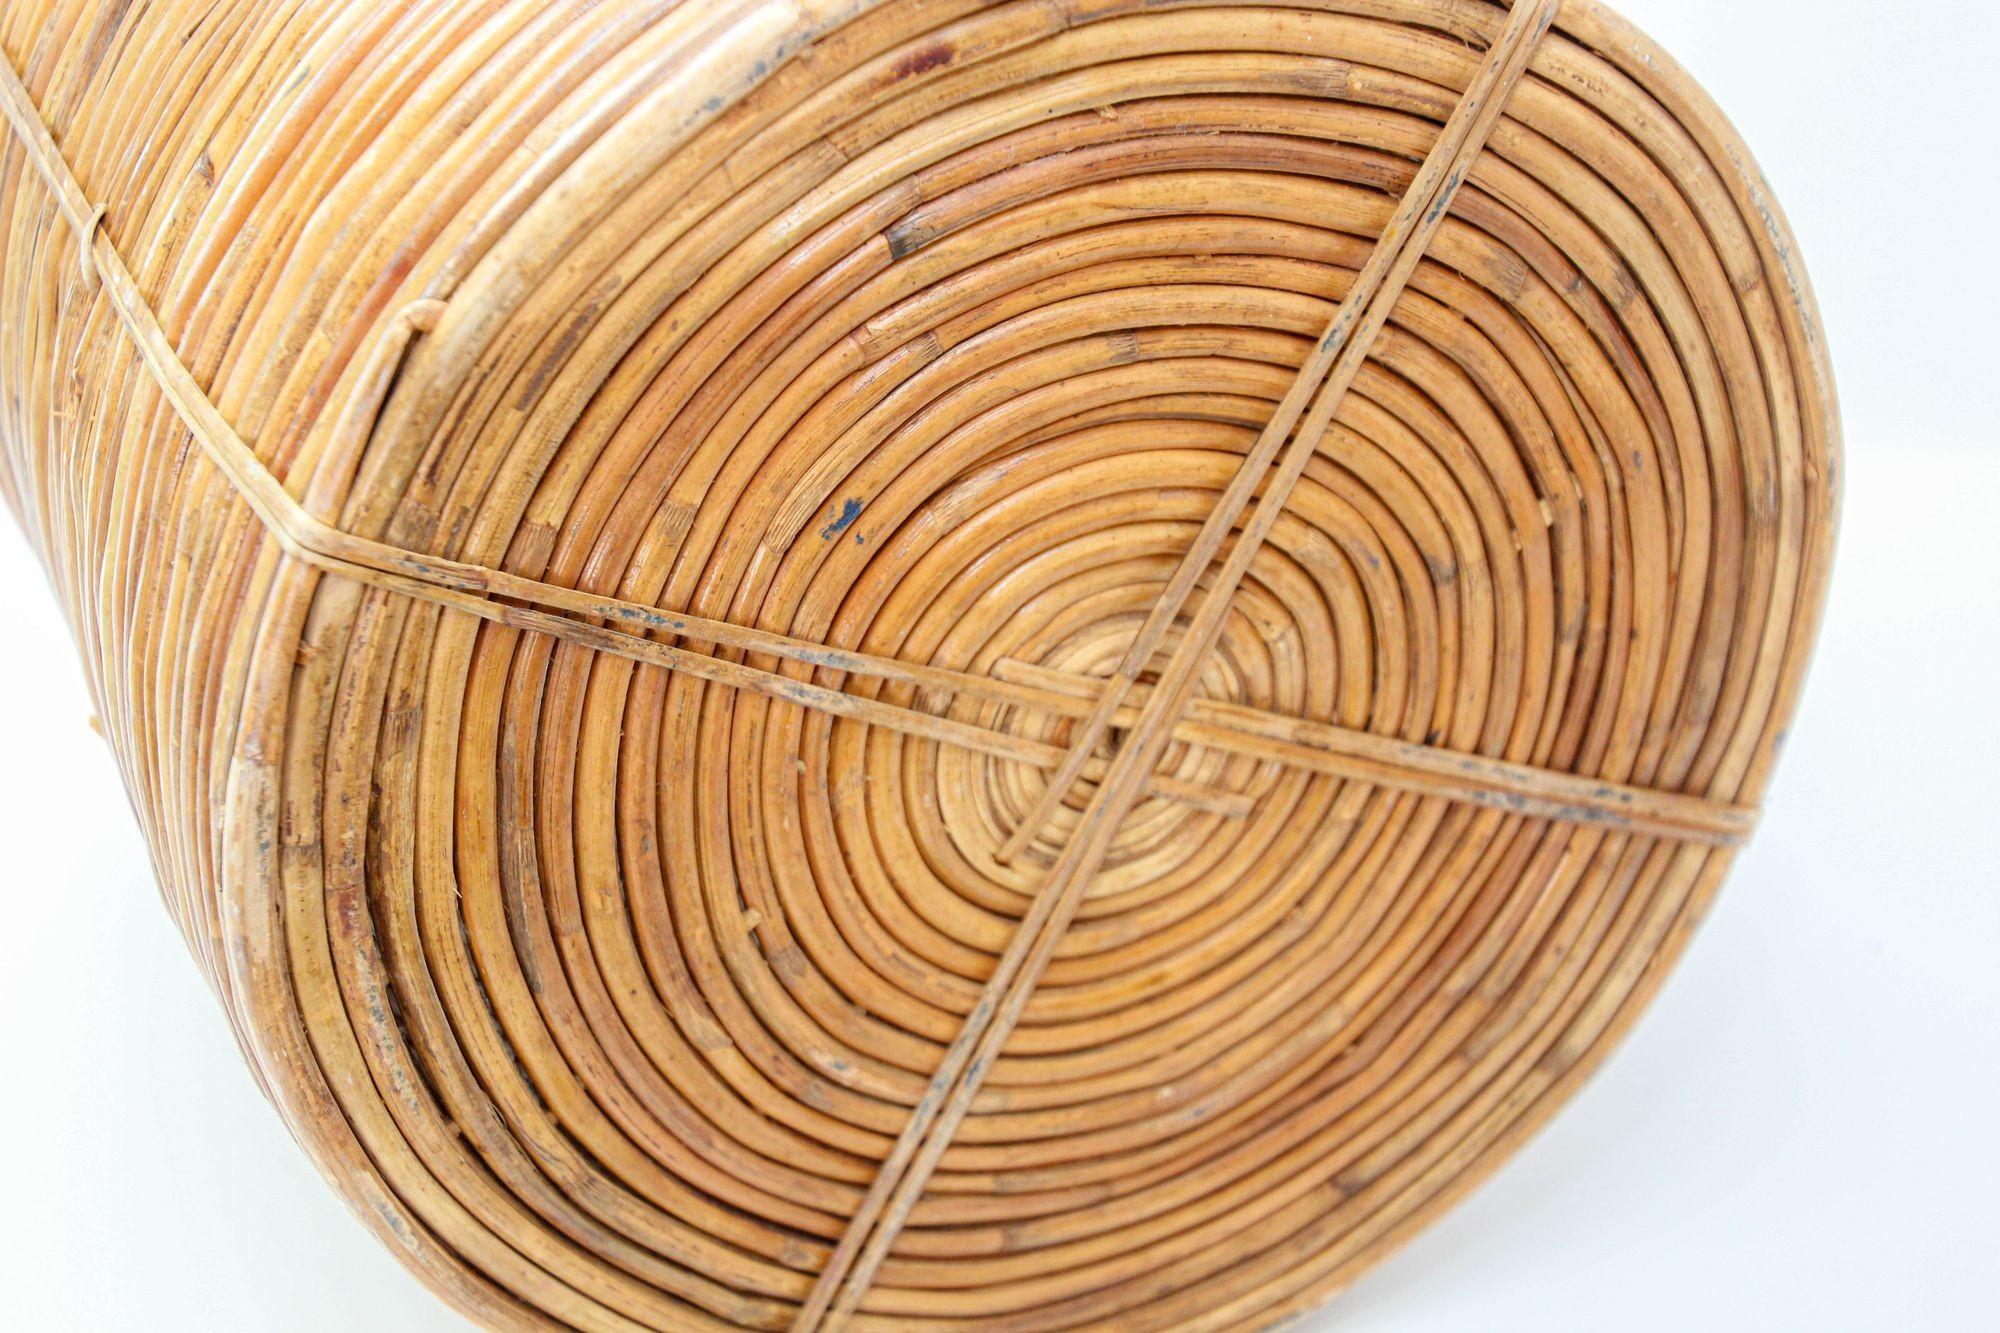 Large Rattan Bamboo Round Planter Brass Rim Italy, 1970s For Sale 8